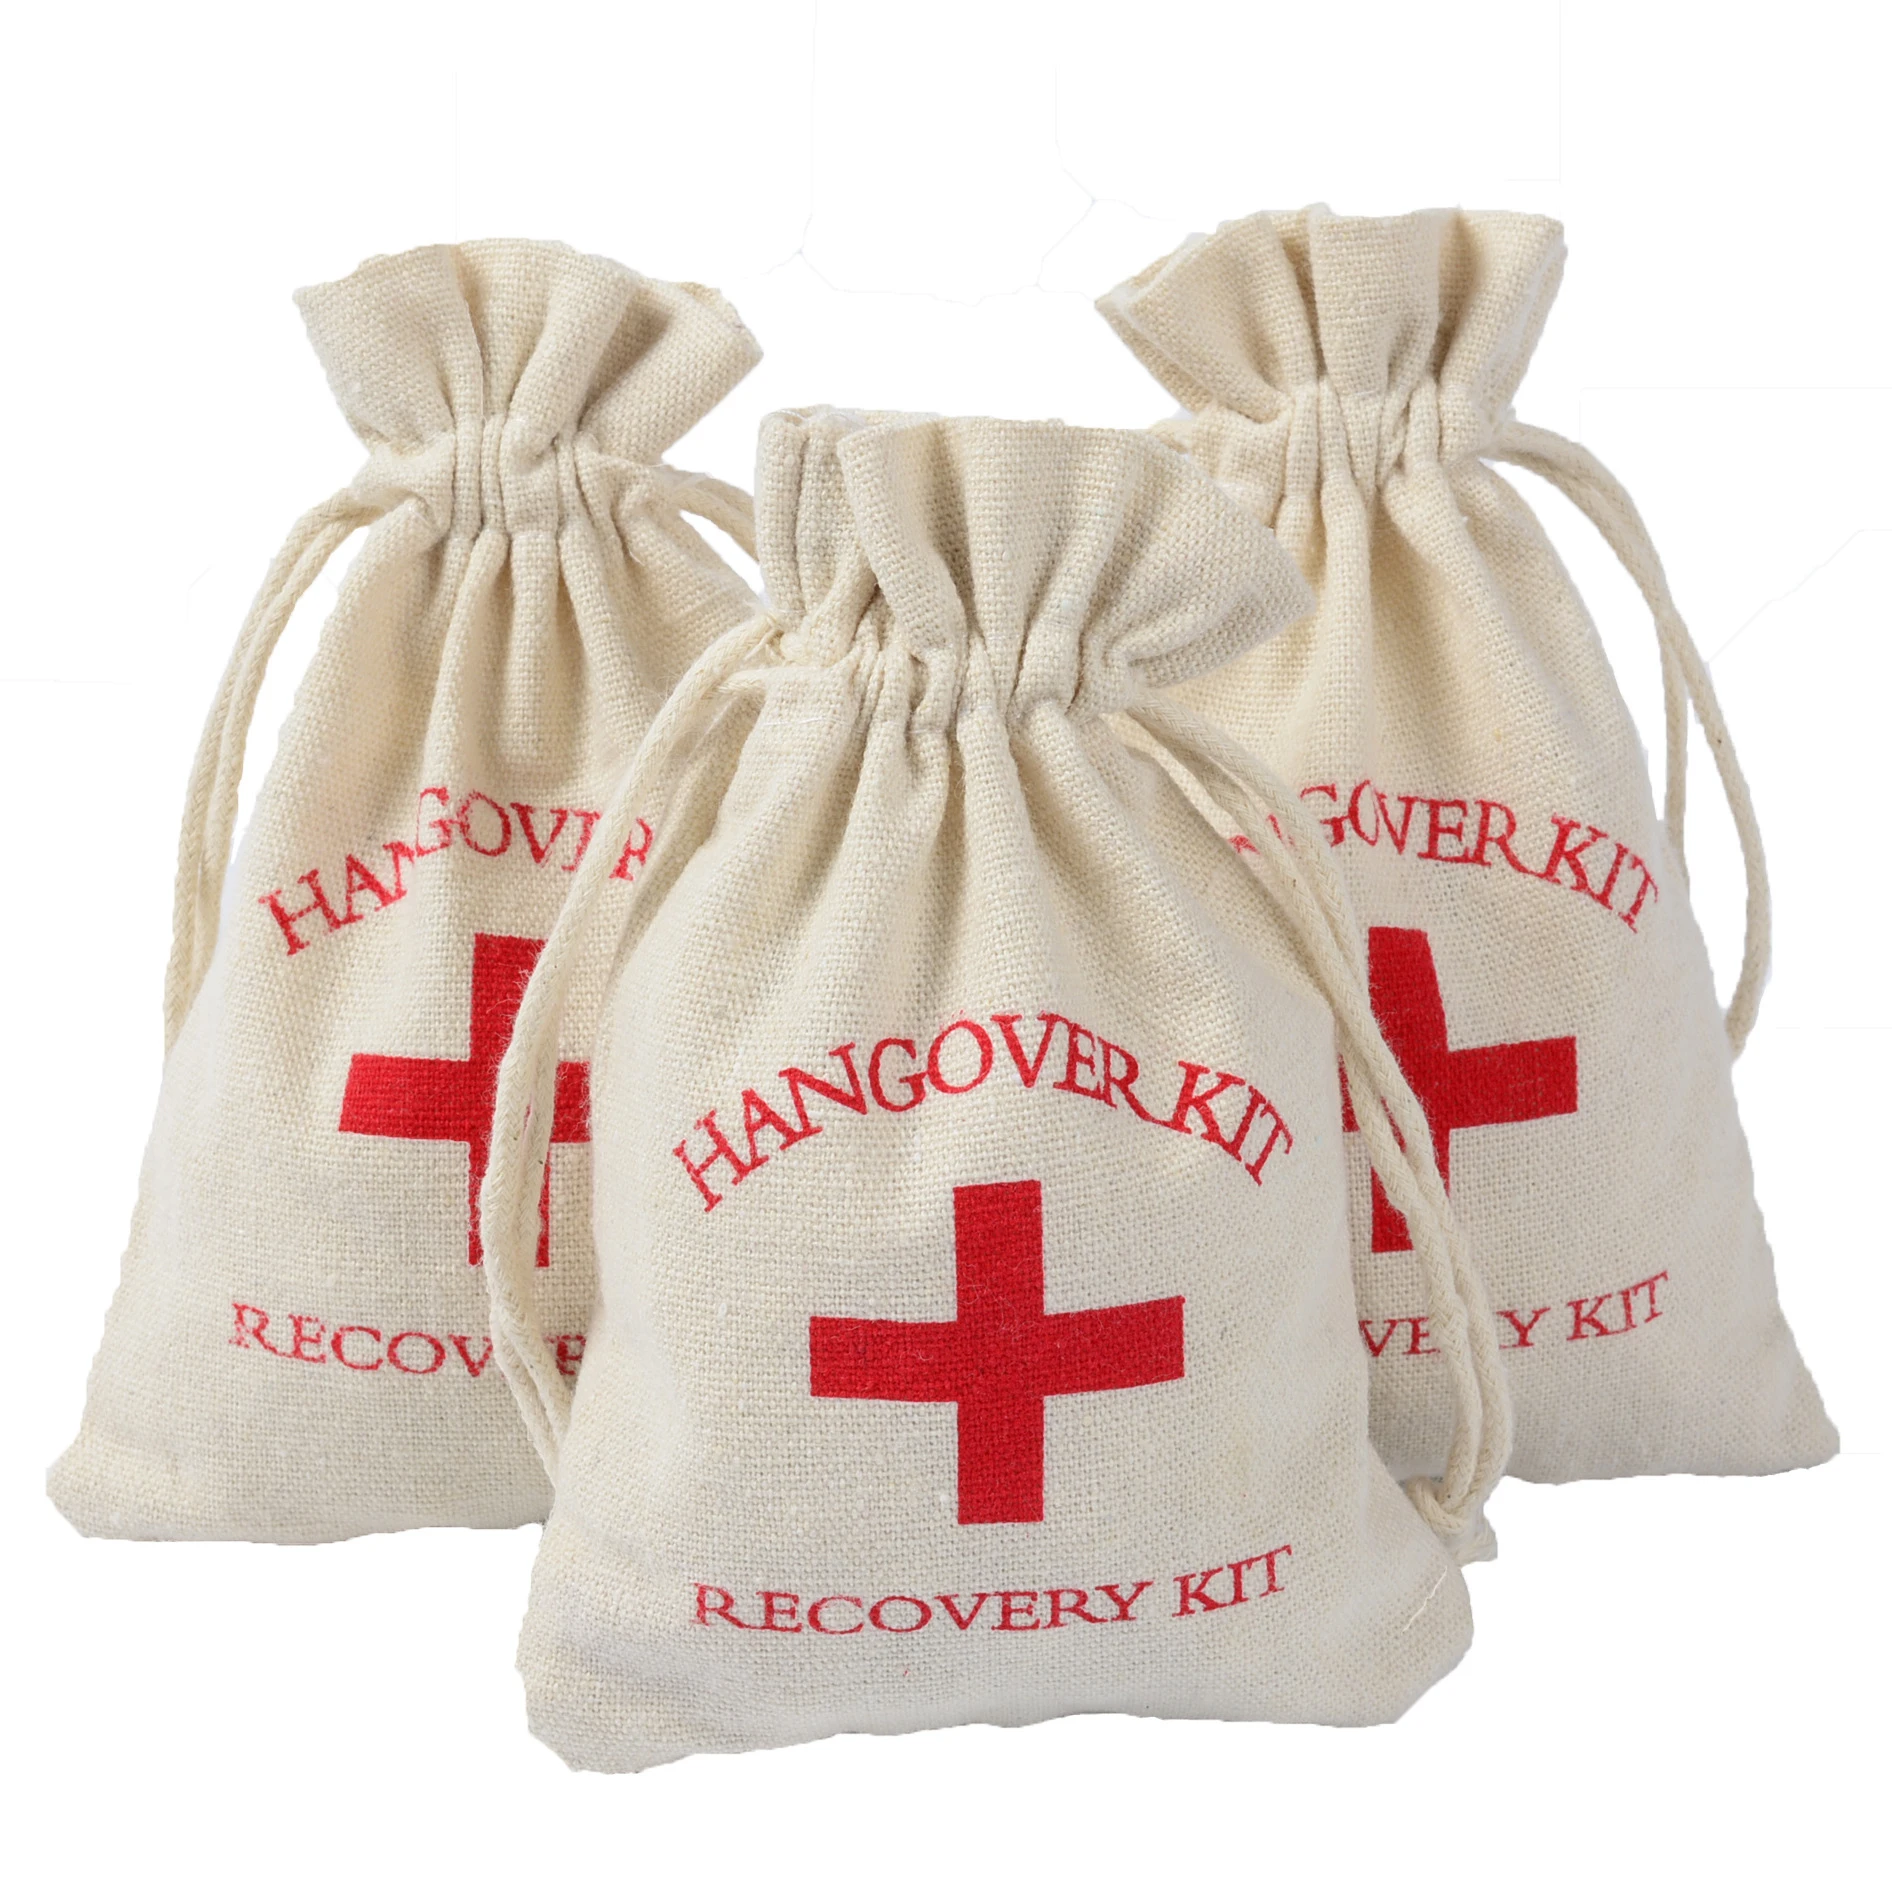 

50Pcs Hangover Kit Bags Wedding Party Favor Holder Bag Guests Gift Red Cross Cotton Linen Kit Festival Xmas Event Party Supplies